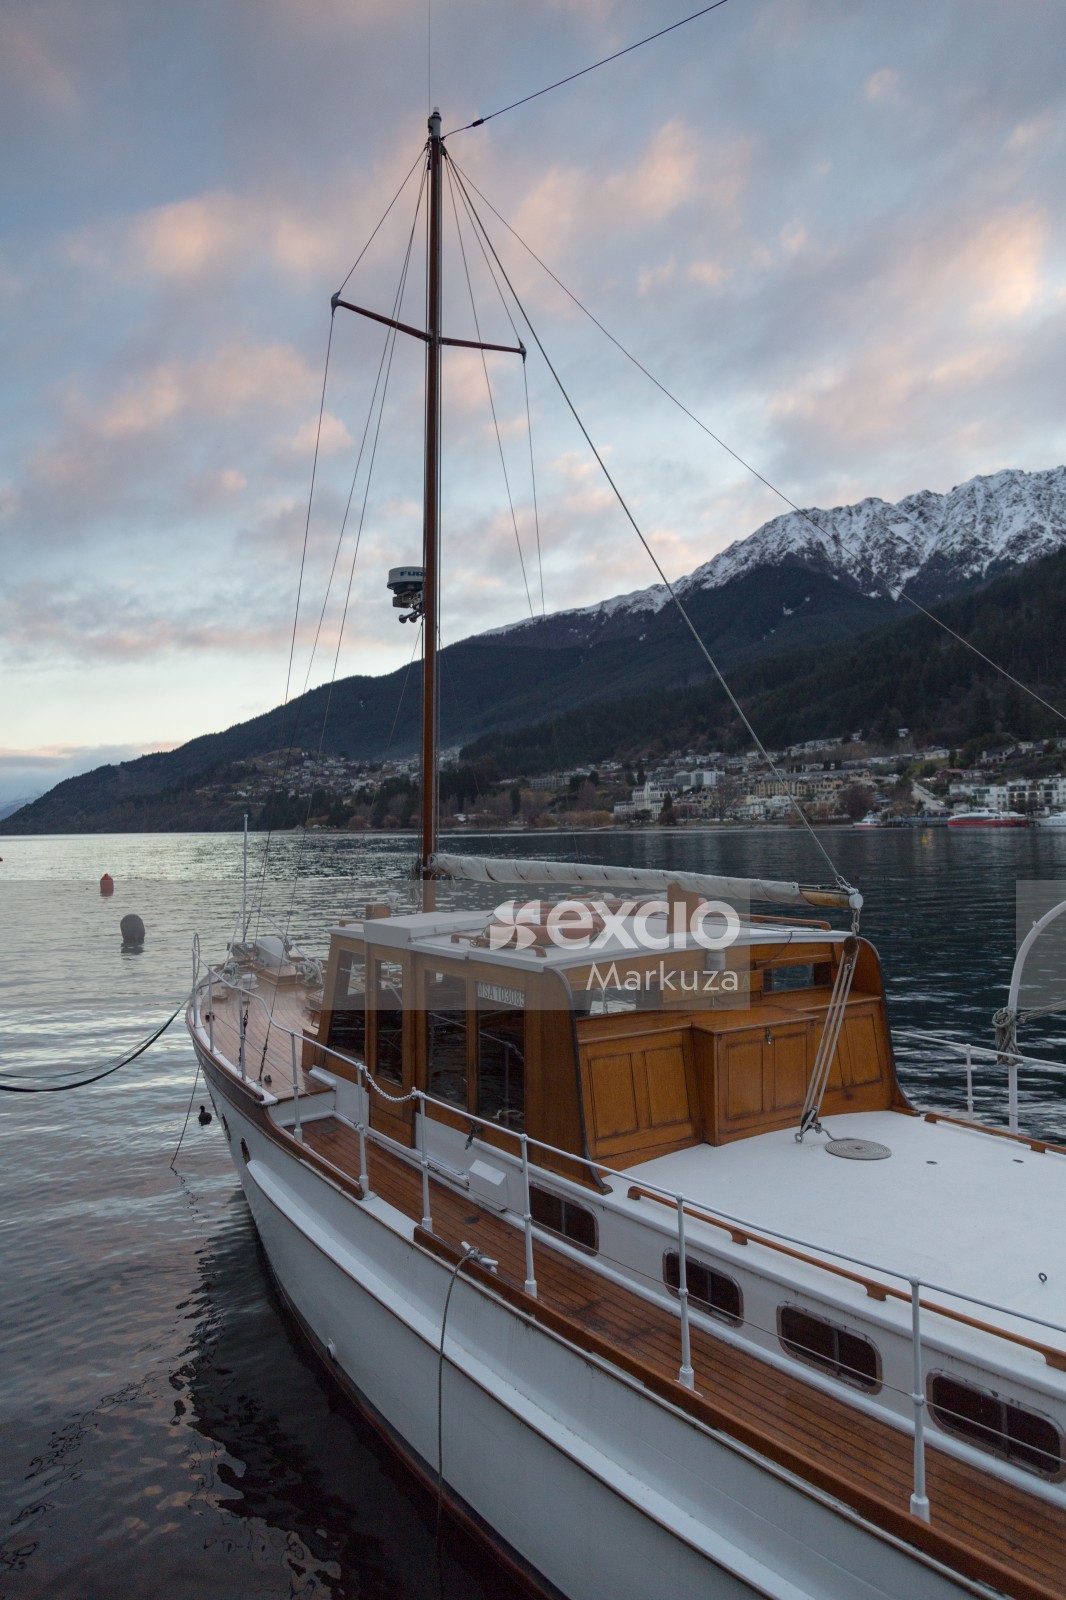 Queenstown, the Yvalda boat